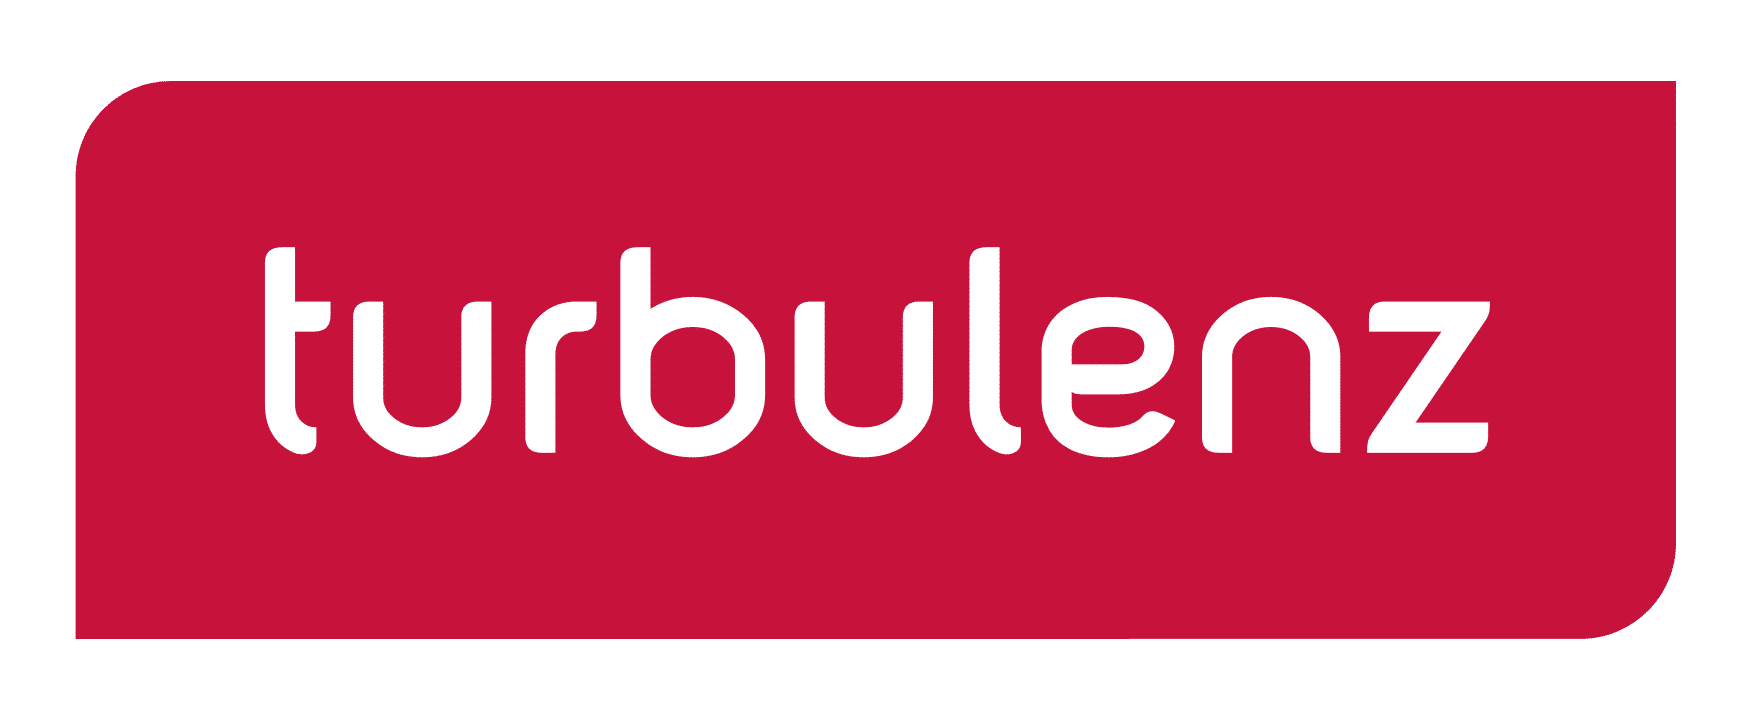 Turbulenz HTML5 game engine is now open source